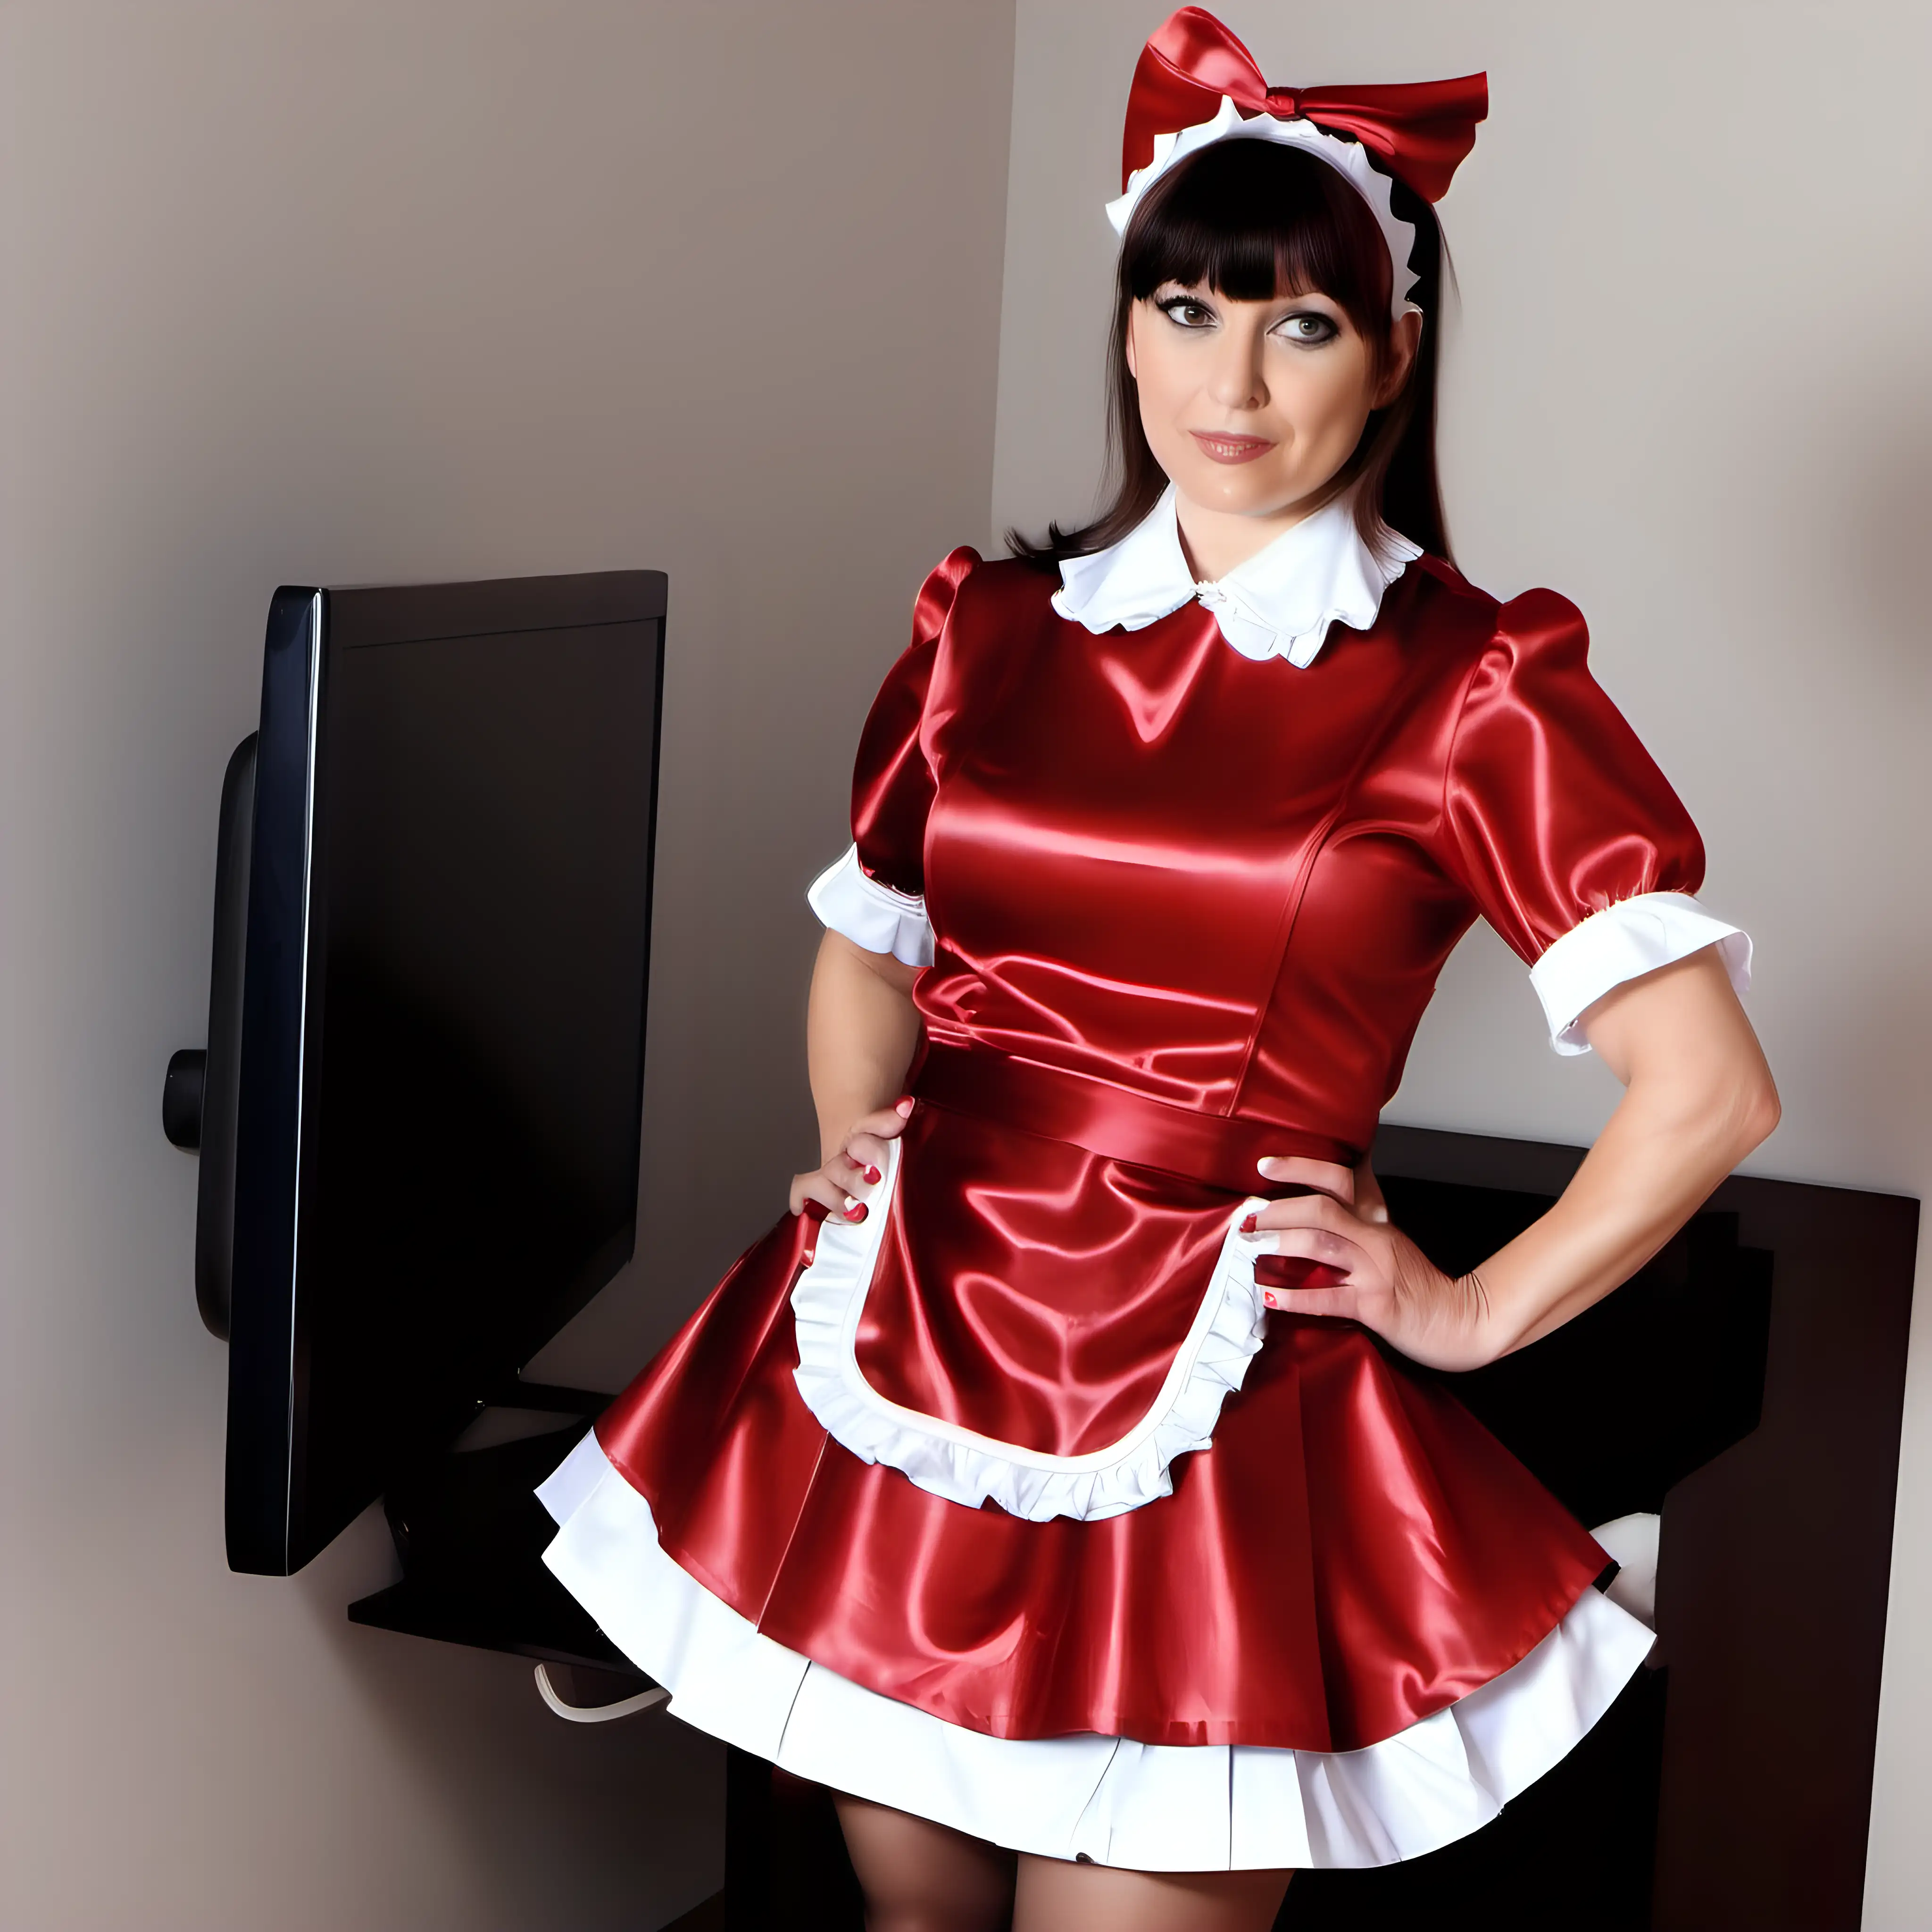 litle girl maid in red satin uniforms and your milf mistress